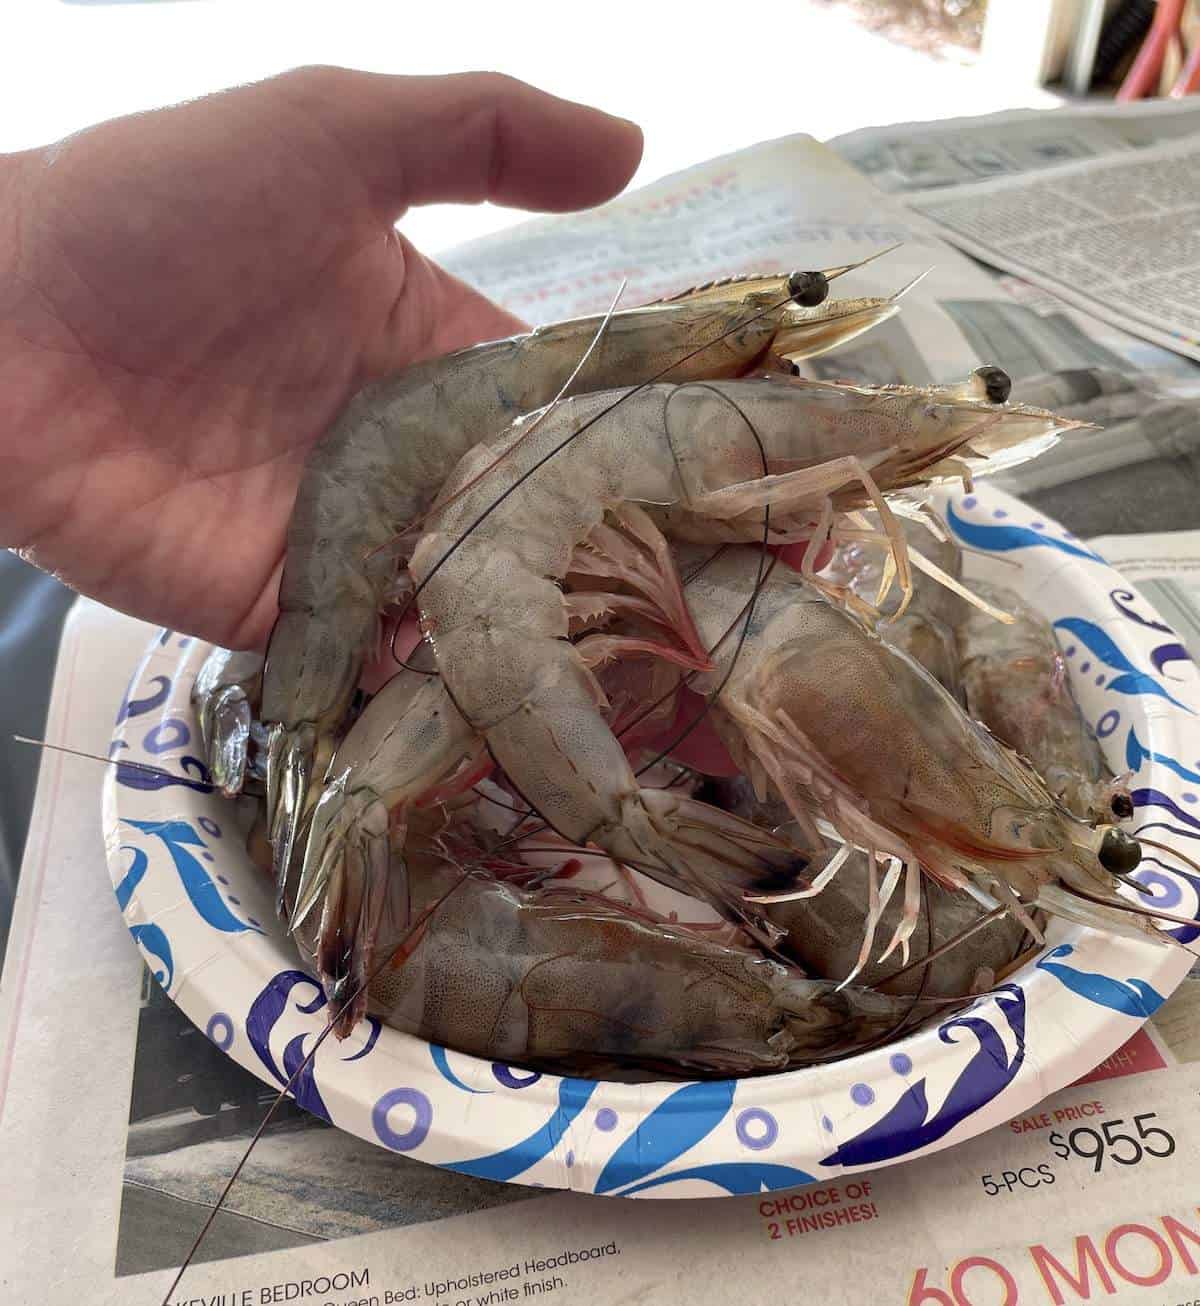 A hand holding two large raw gulf shrimp over a plate of more shrimp.